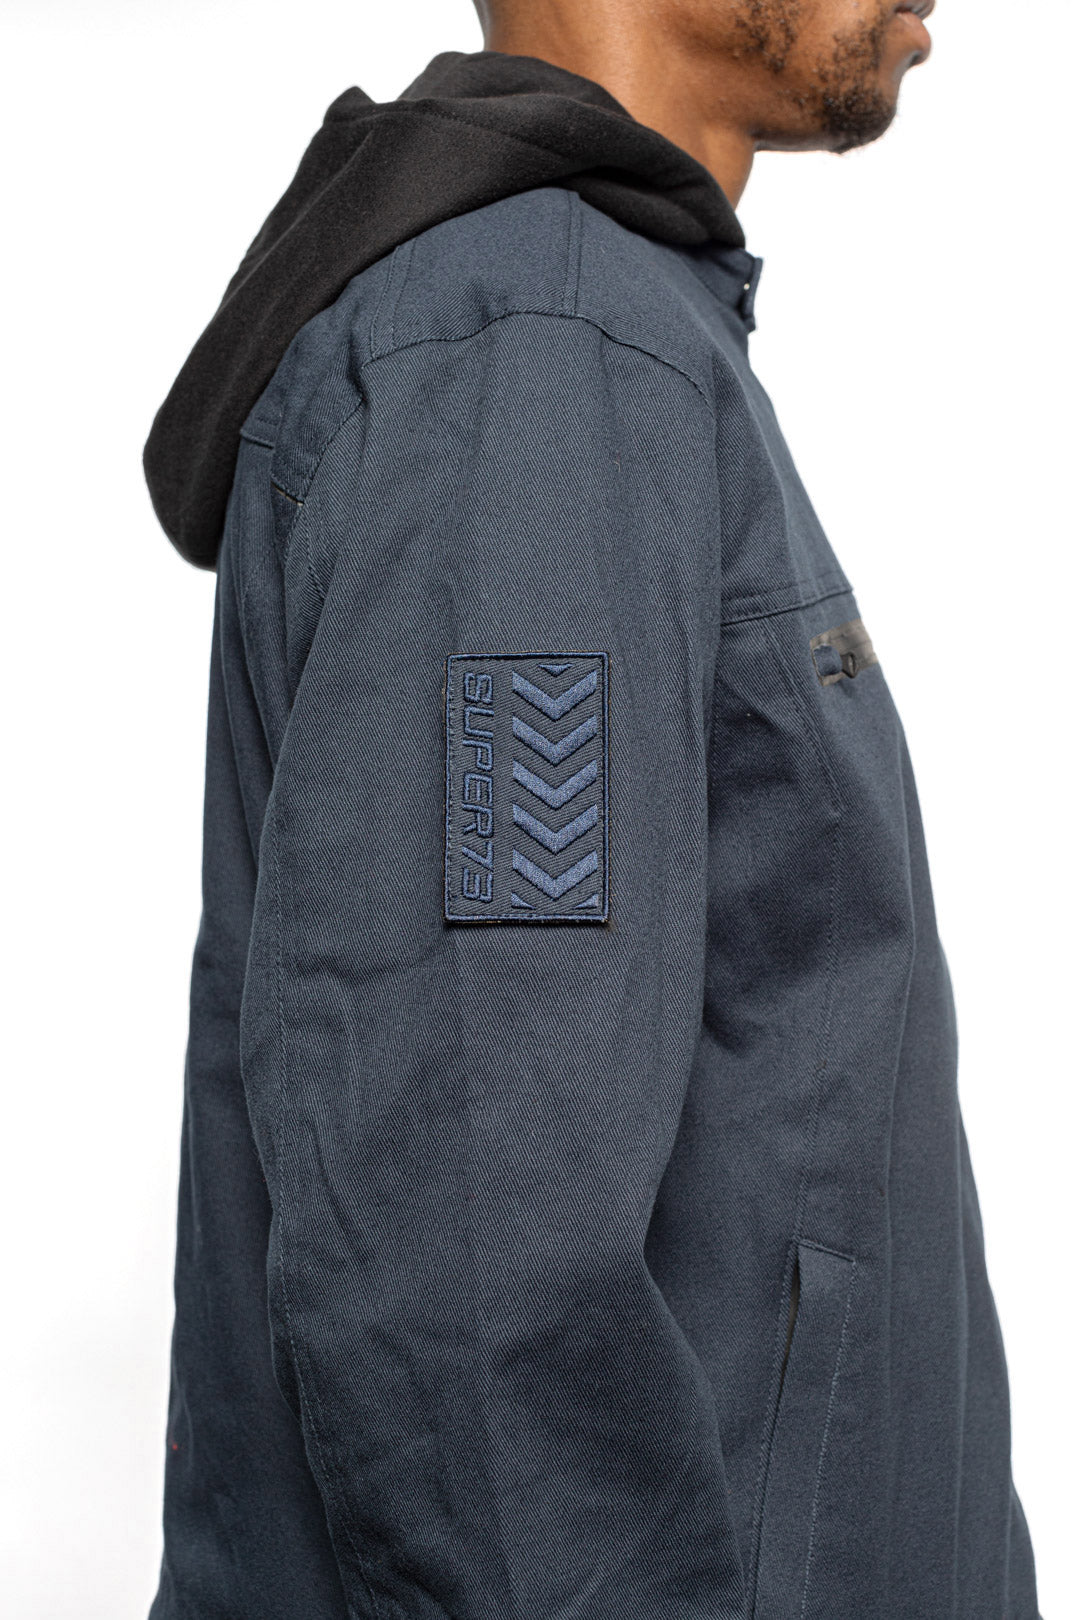 Side sleeve detail view of Male model wearing Chisel Hooded Jacket in midnight colorway.